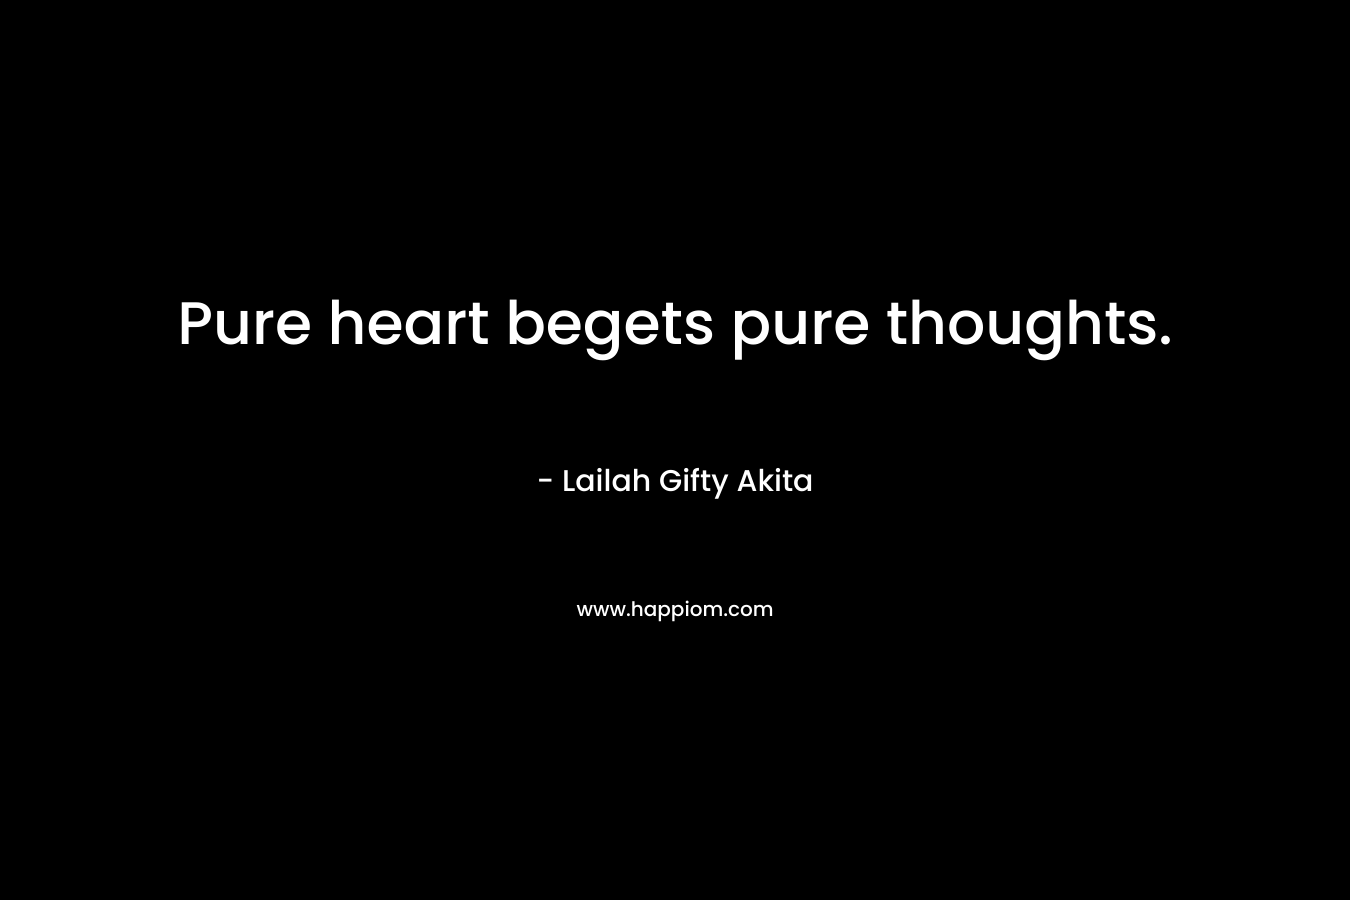 Pure heart begets pure thoughts. – Lailah Gifty Akita